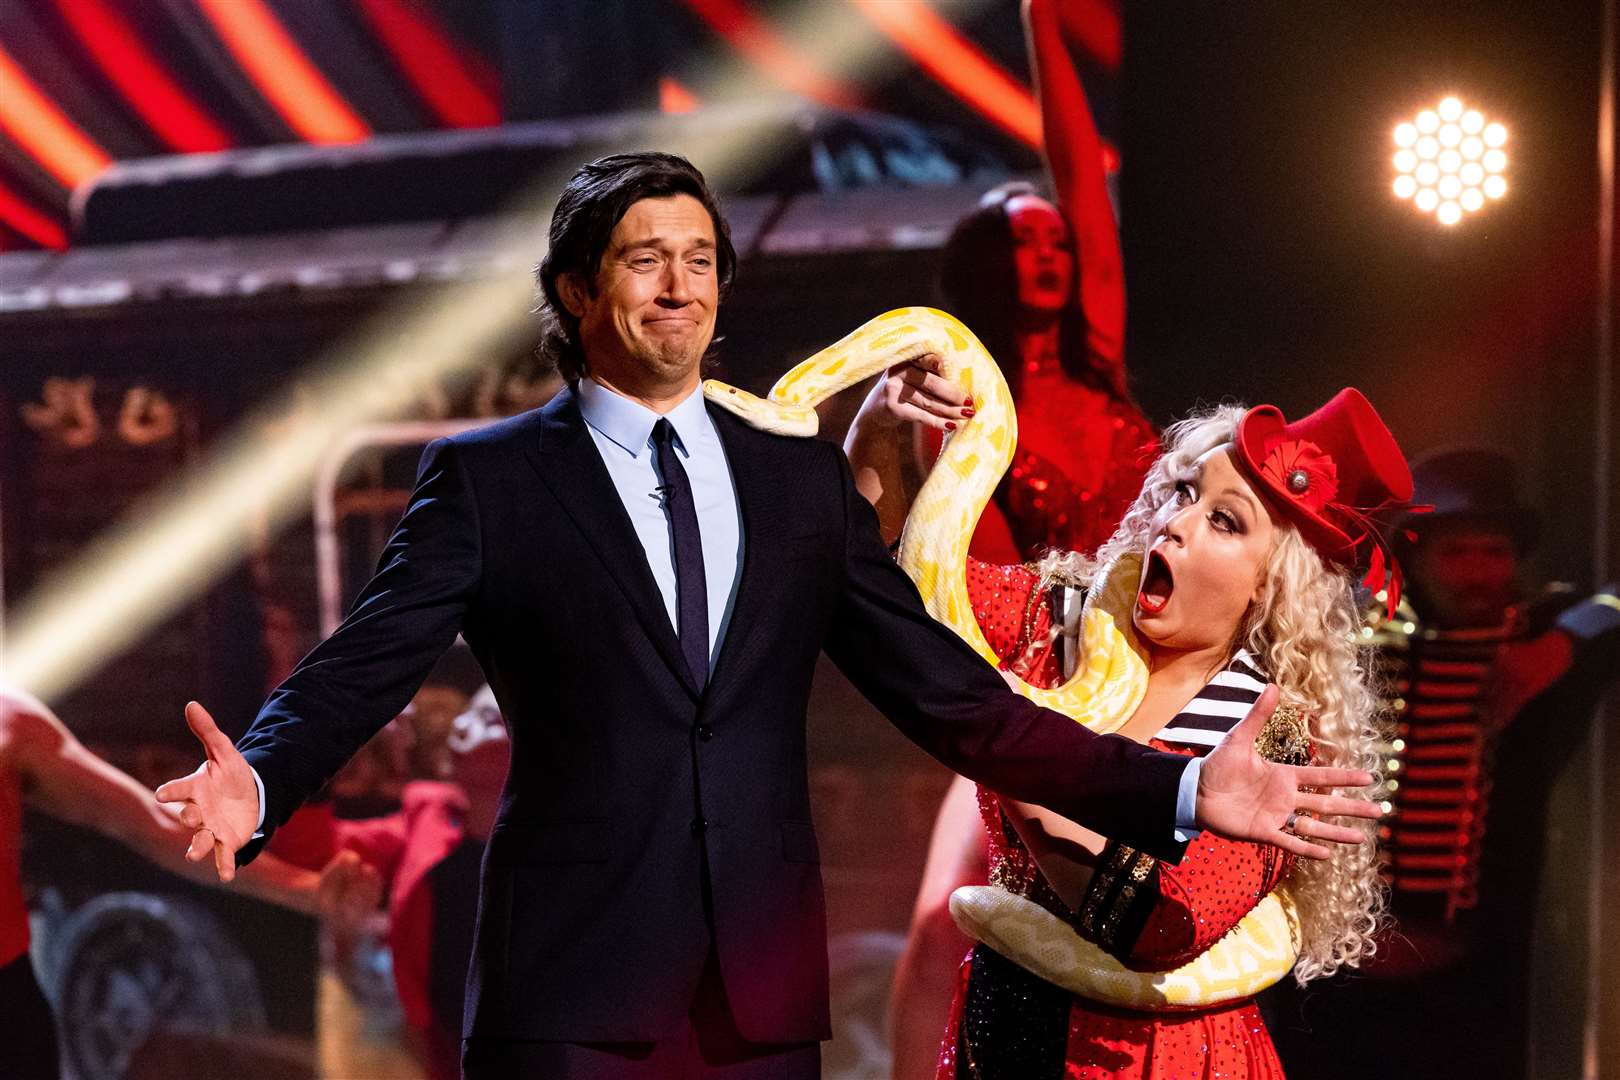 Former I'm A Celeb star Vernon Kay is given a fright by Danielle Martin, who works at a Dartford care home, and her 7ft albino Burmese python. Picture: Thames/ITV